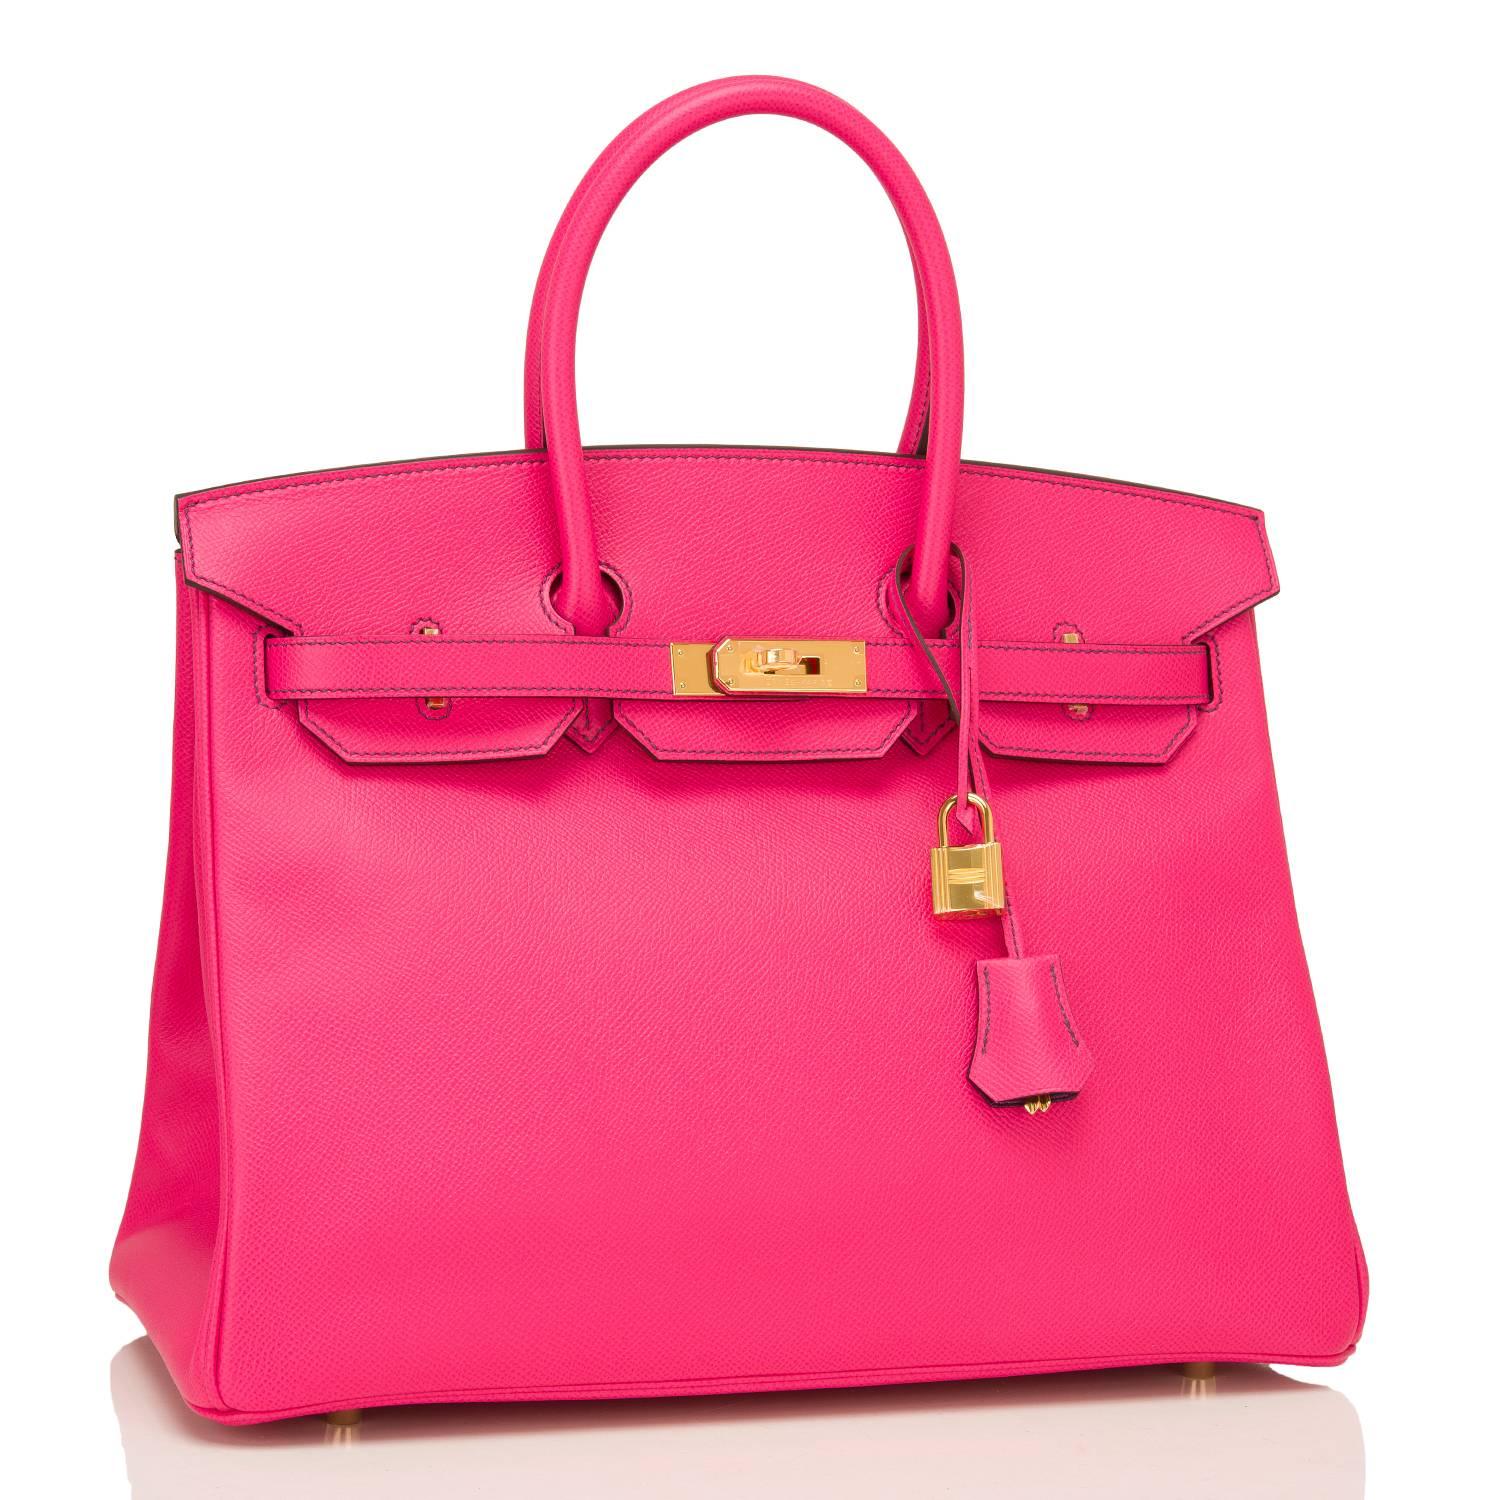 Hermes special order bi-color Birkin 35cm of Rose Tyrien epsom leather with Crocus interior accented with gold hardware.

This pink epsom Birkin has Crocus contrast stitching, front toggle closure, clochette with lock and two keys, and double